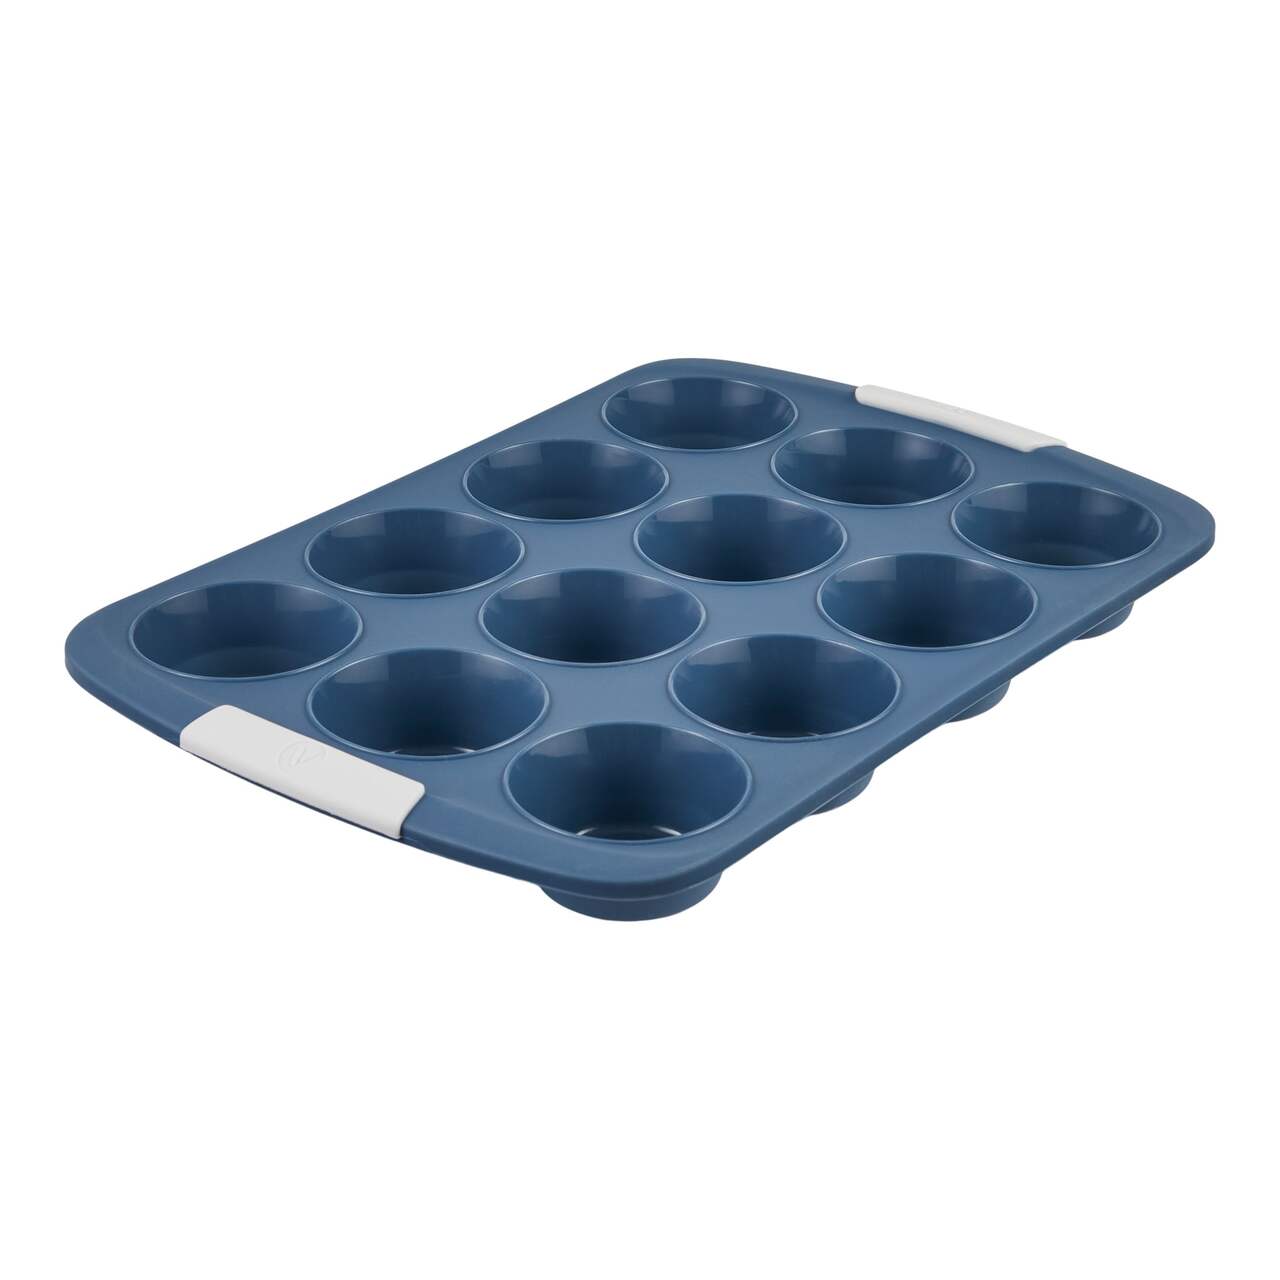 https://media-www.canadiantire.ca/product/living/kitchen/bakeware-baking-prep/1429688/vida-silicone-with-structure-12-cup-muffin-pan-490e700c-de74-4f4c-adbf-2a9b77f61b9e-jpgrendition.jpg?imdensity=1&imwidth=640&impolicy=mZoom